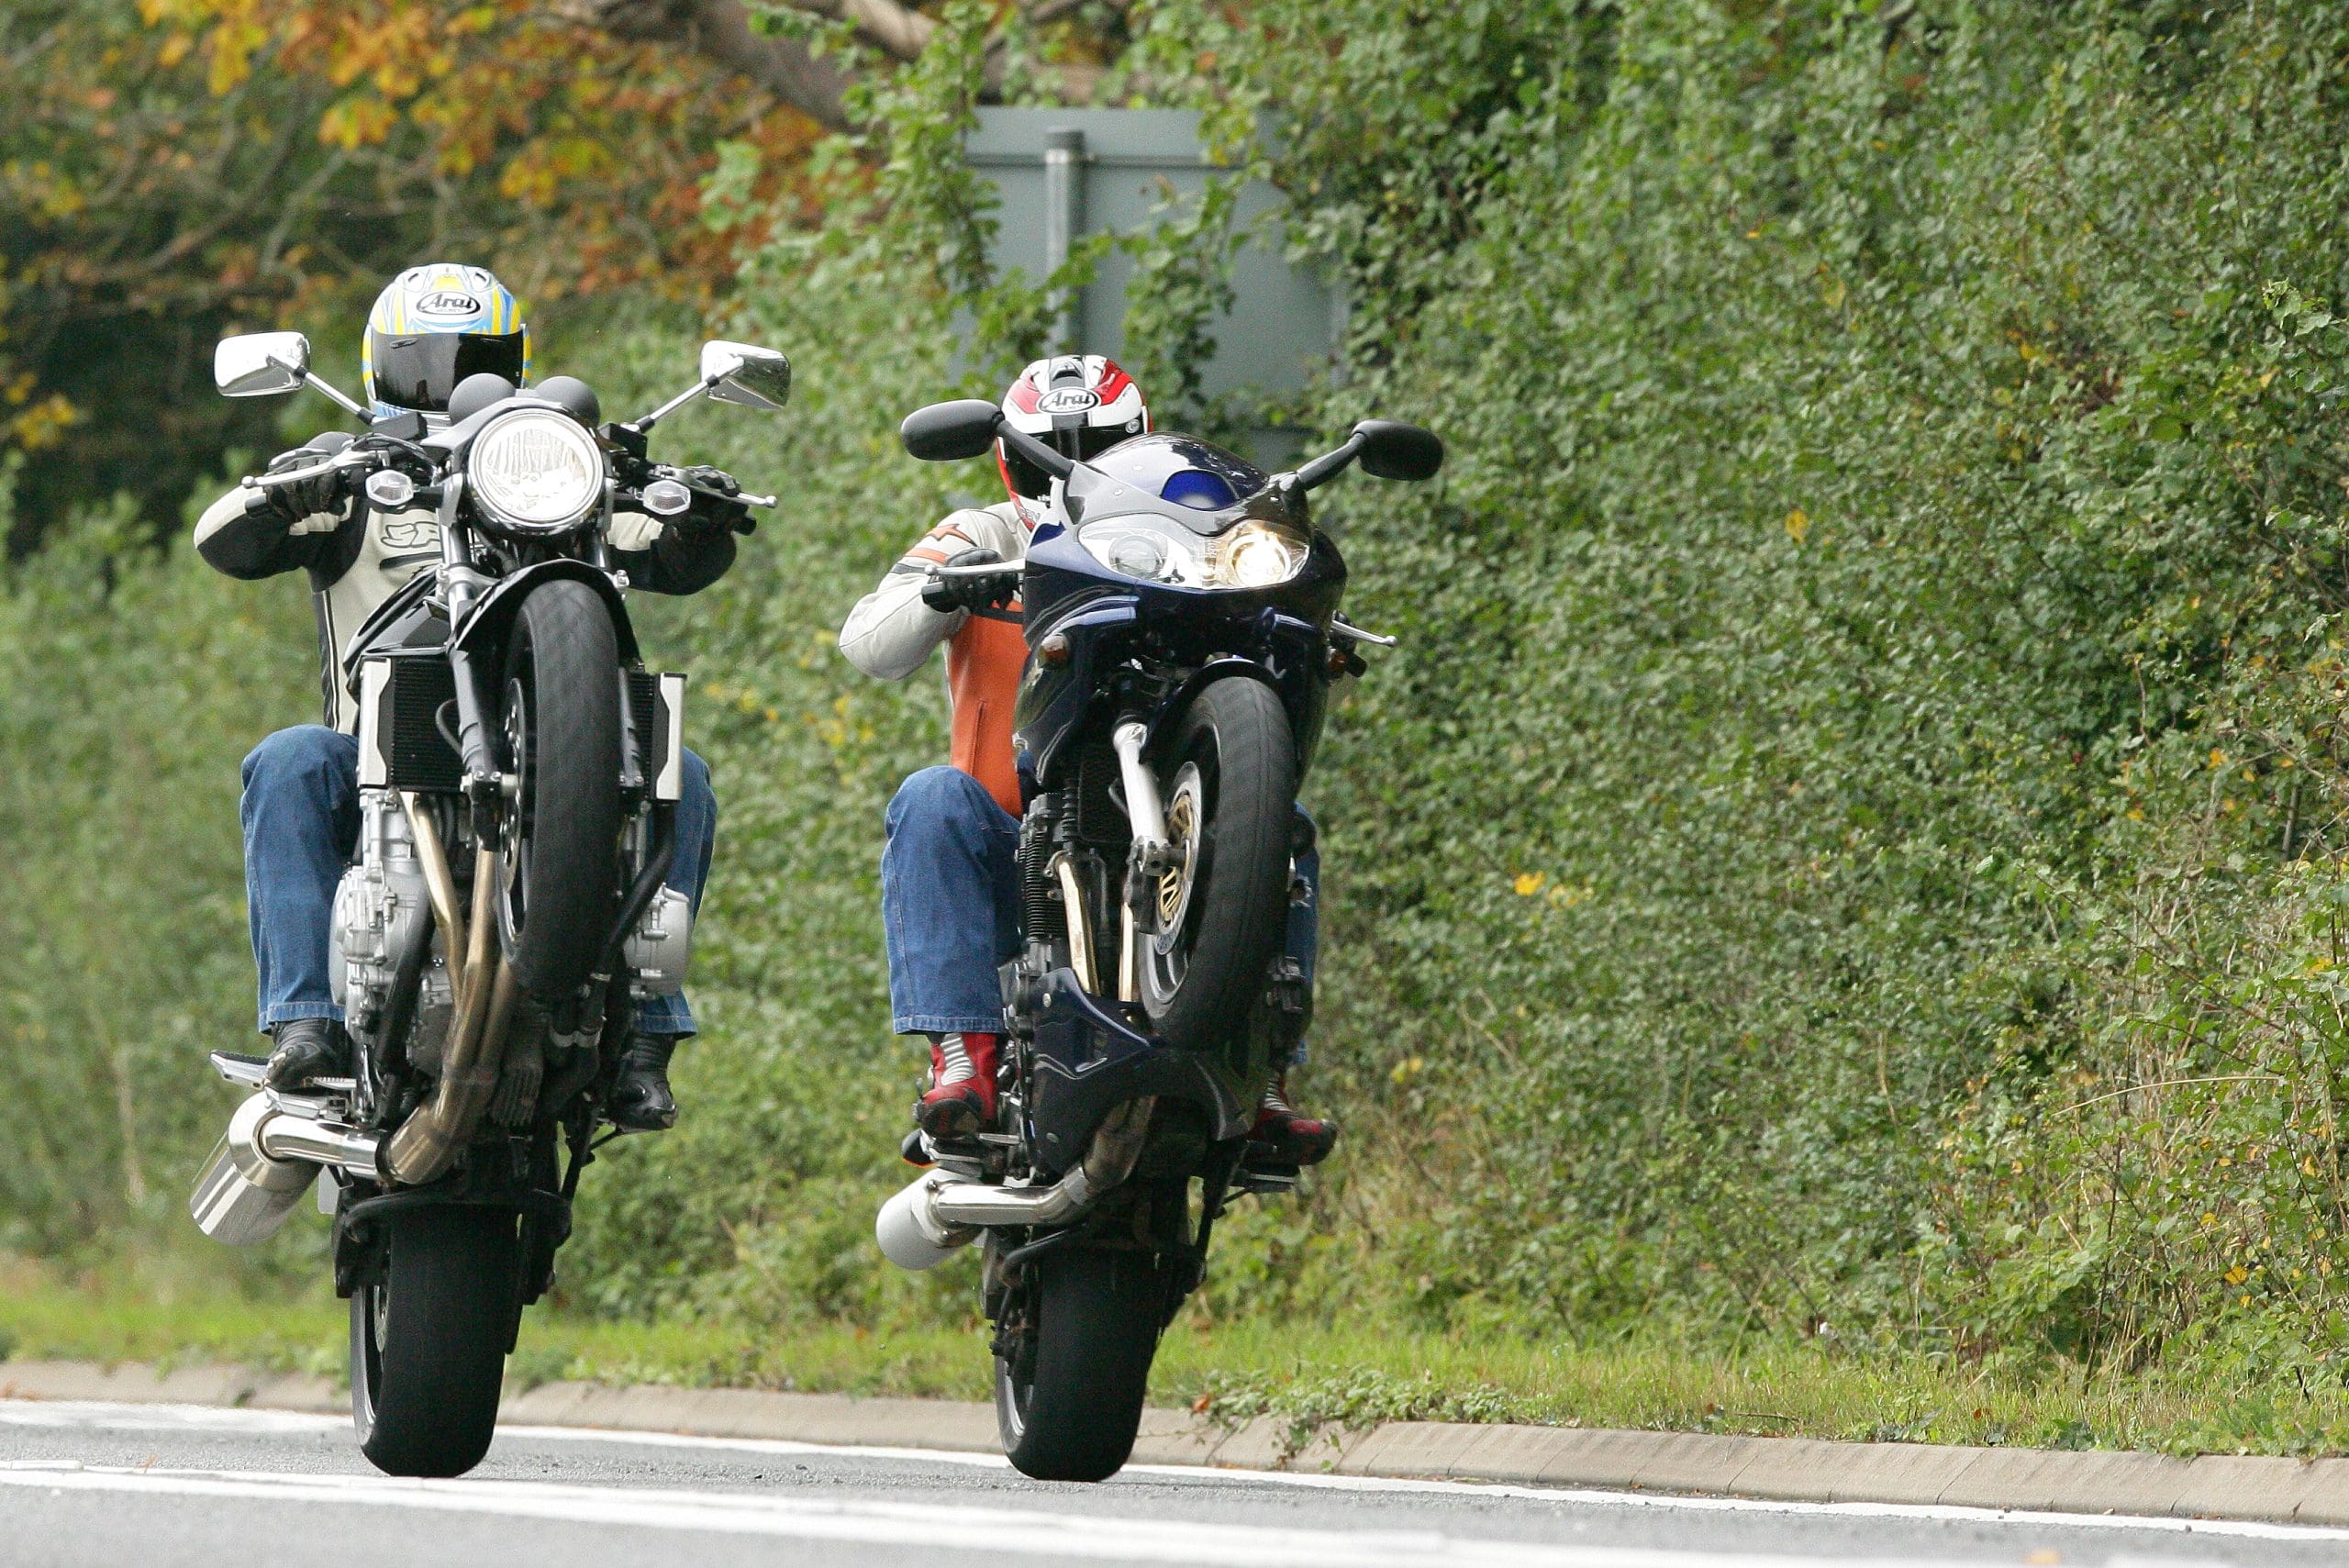 Two motorcyclists perform wheelies on motorcycles